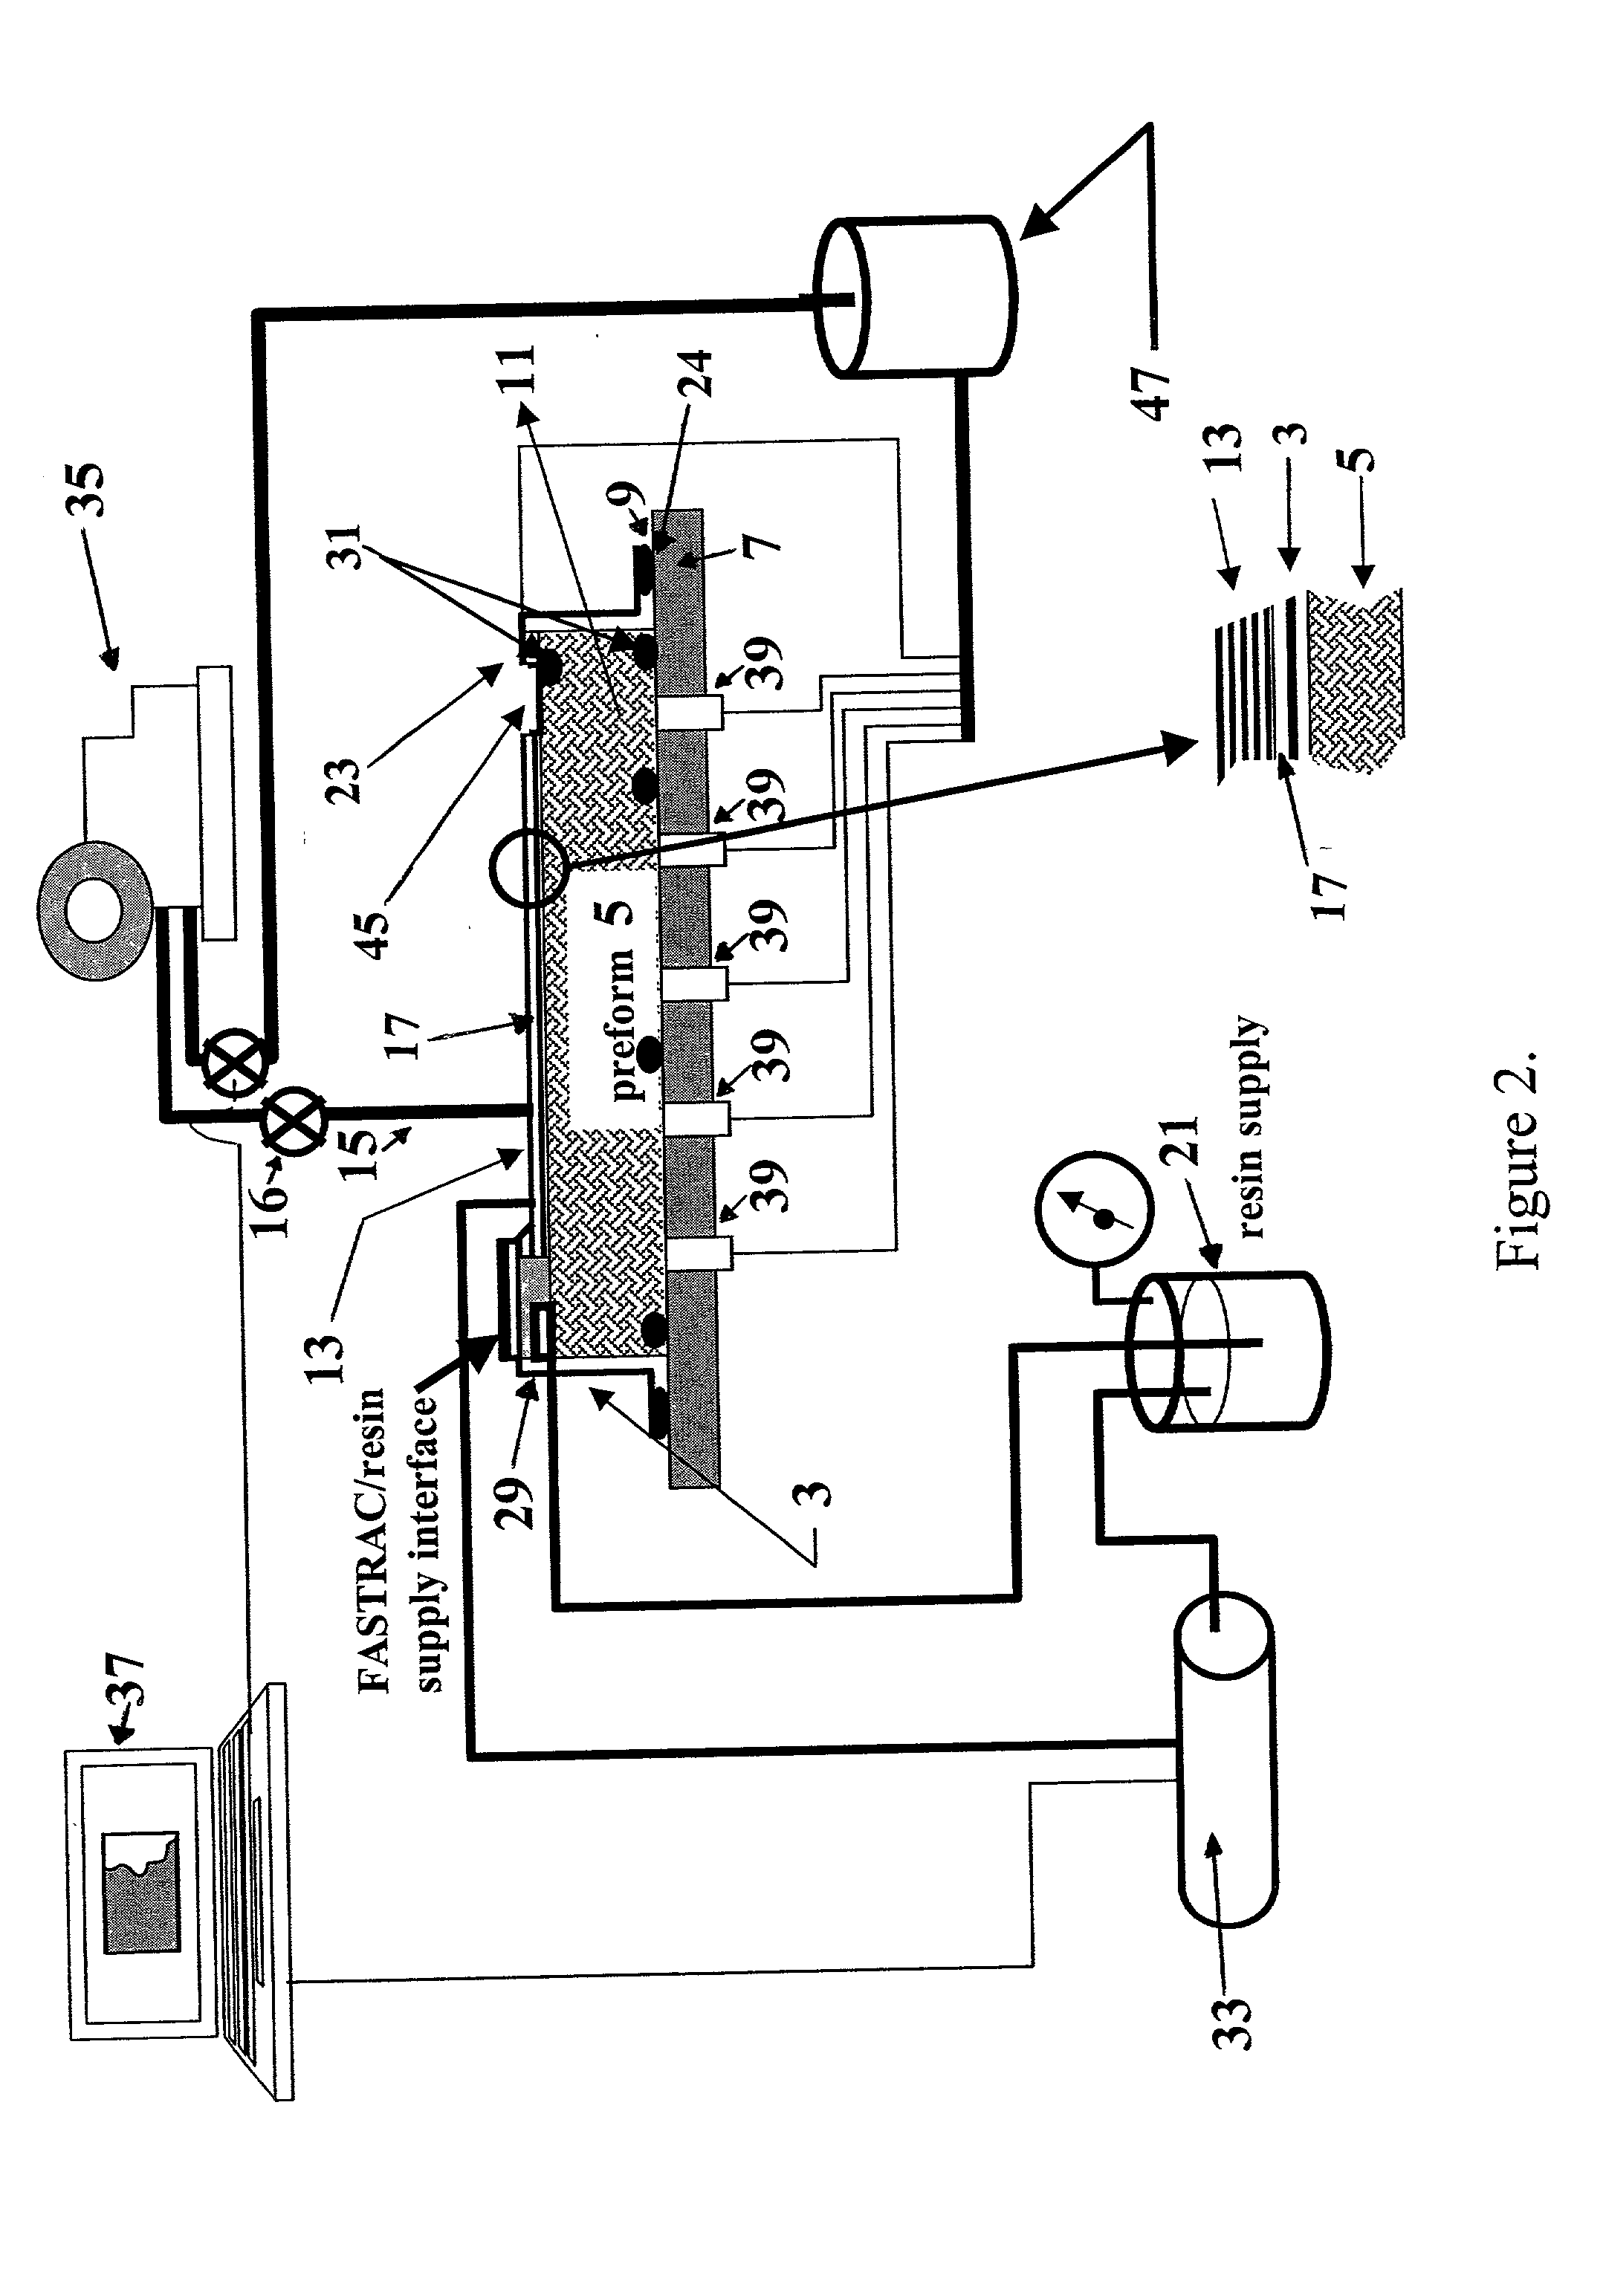 Apparatus and method for selectively distributing and controlling a means for impregnation of fibrous articles